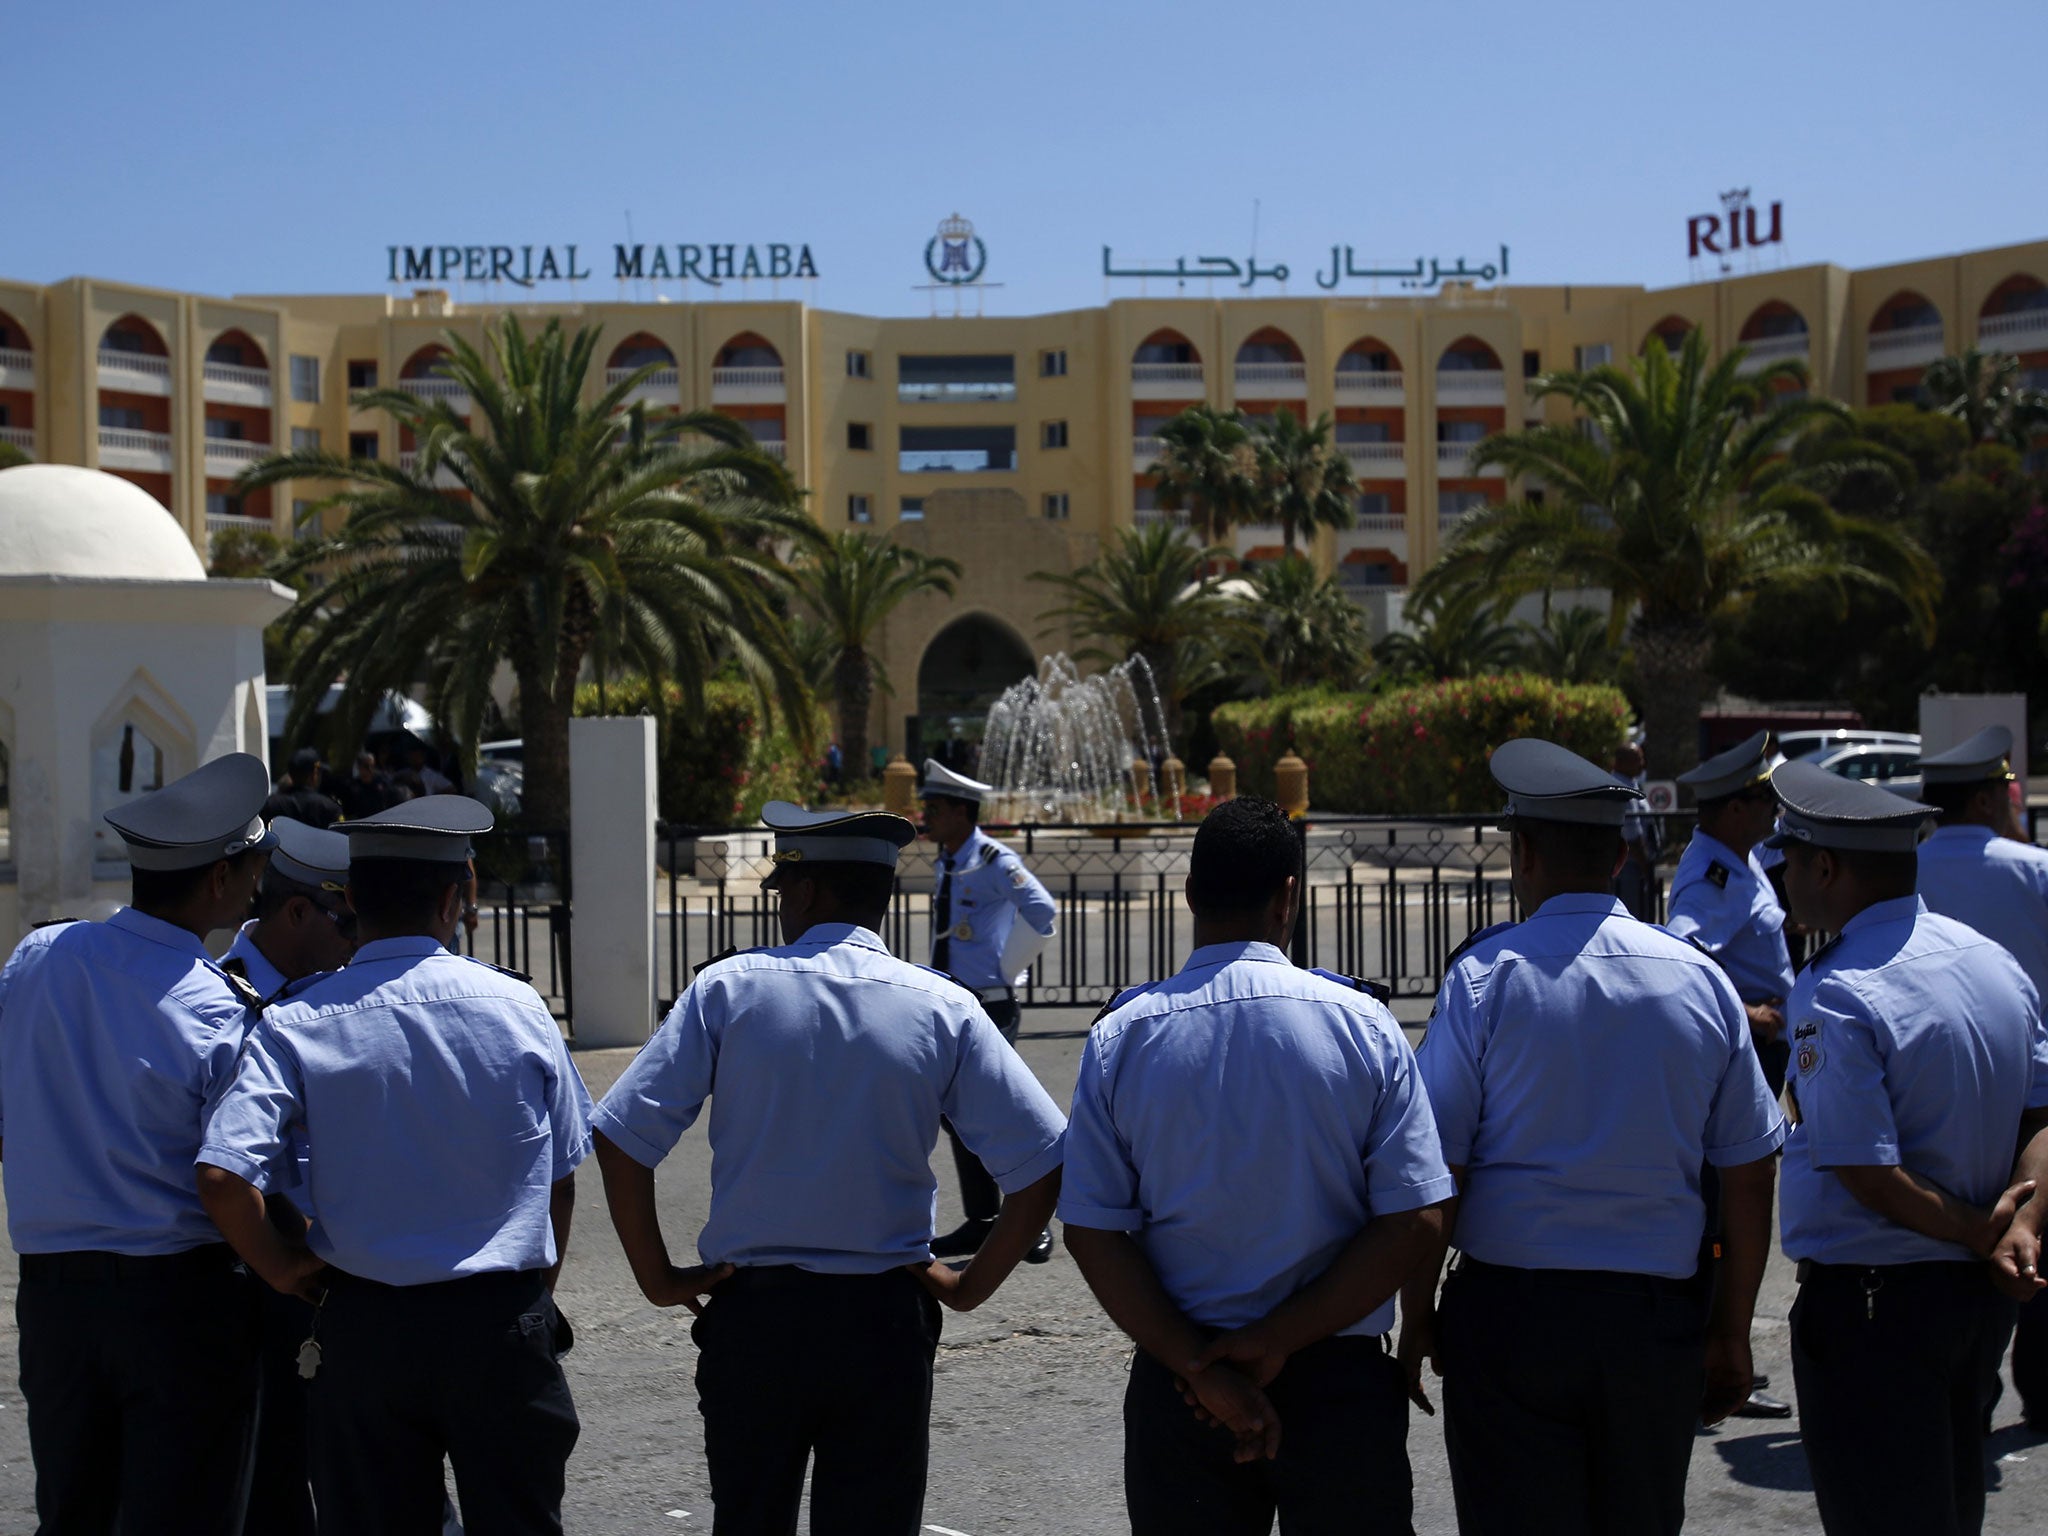 Tunisian police officers guard Imperial Marhaba hotel during visit of top security officials of Britain, France, Germany and Belgium in Sousse, Tunisia, Monday, June 29, 2015